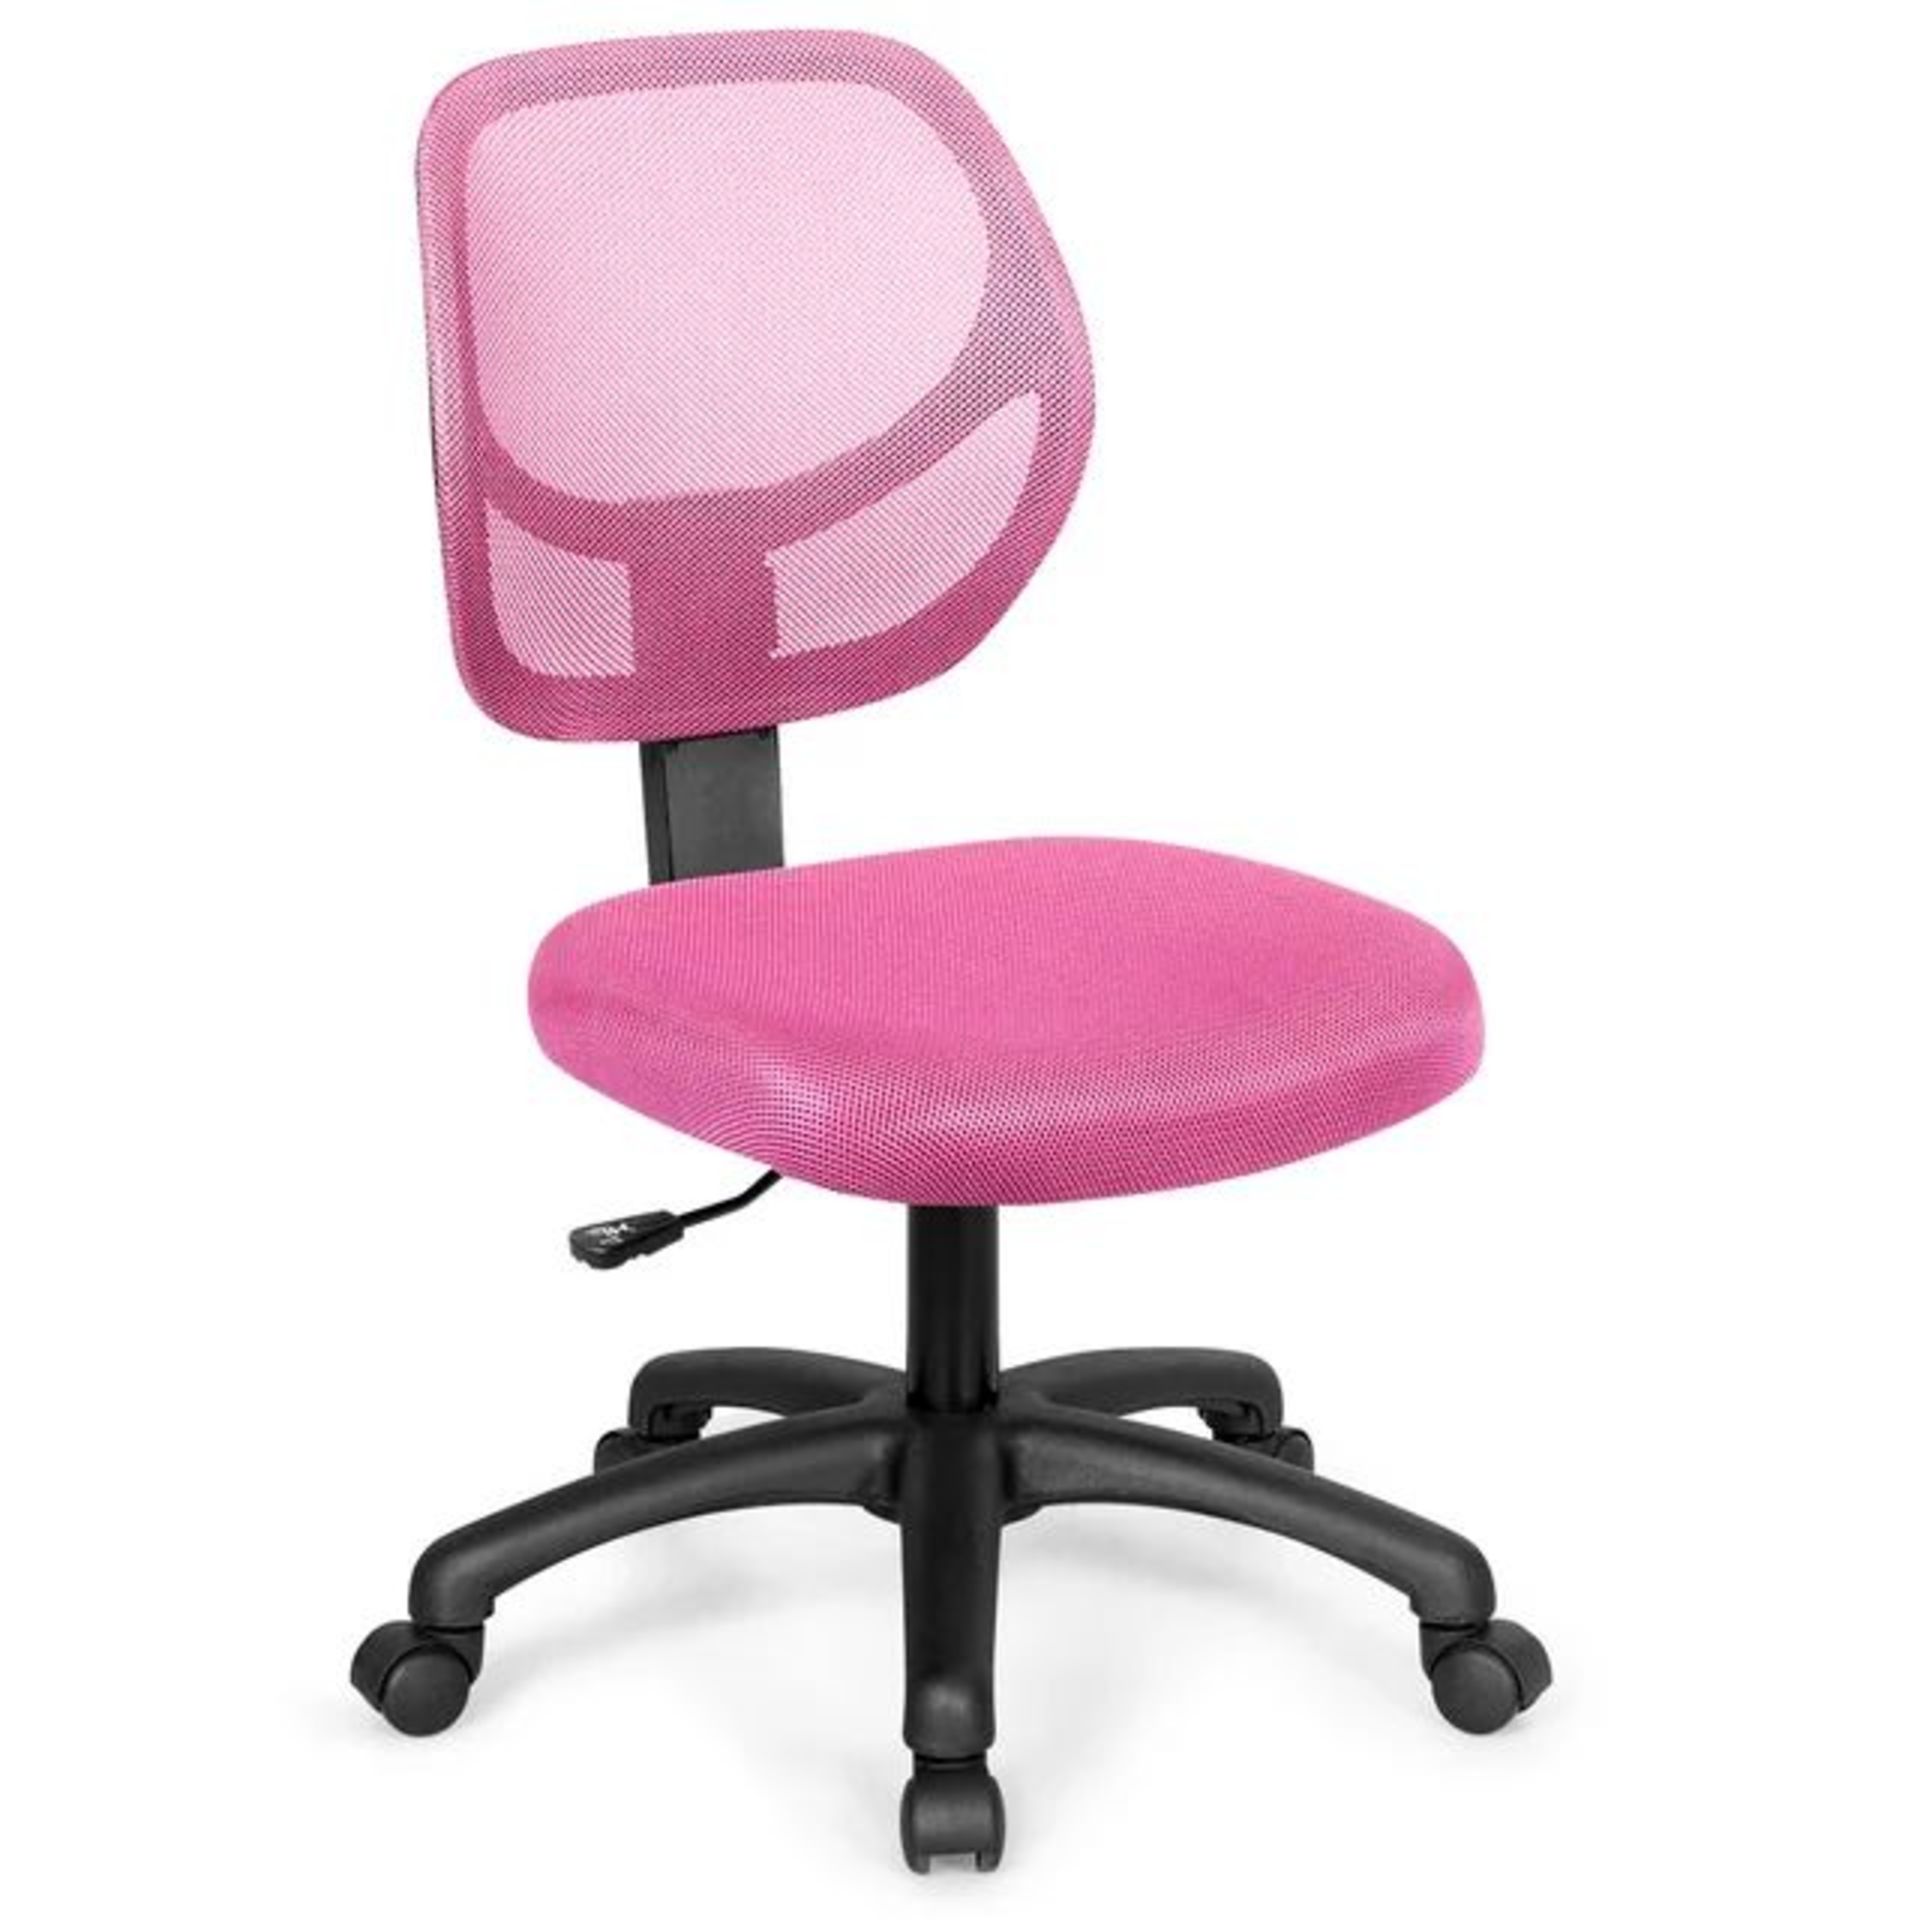 Costway Mesh Office Chair Low-Back Armless Computer Desk Chair Adjustable Height Pink. - ER53.